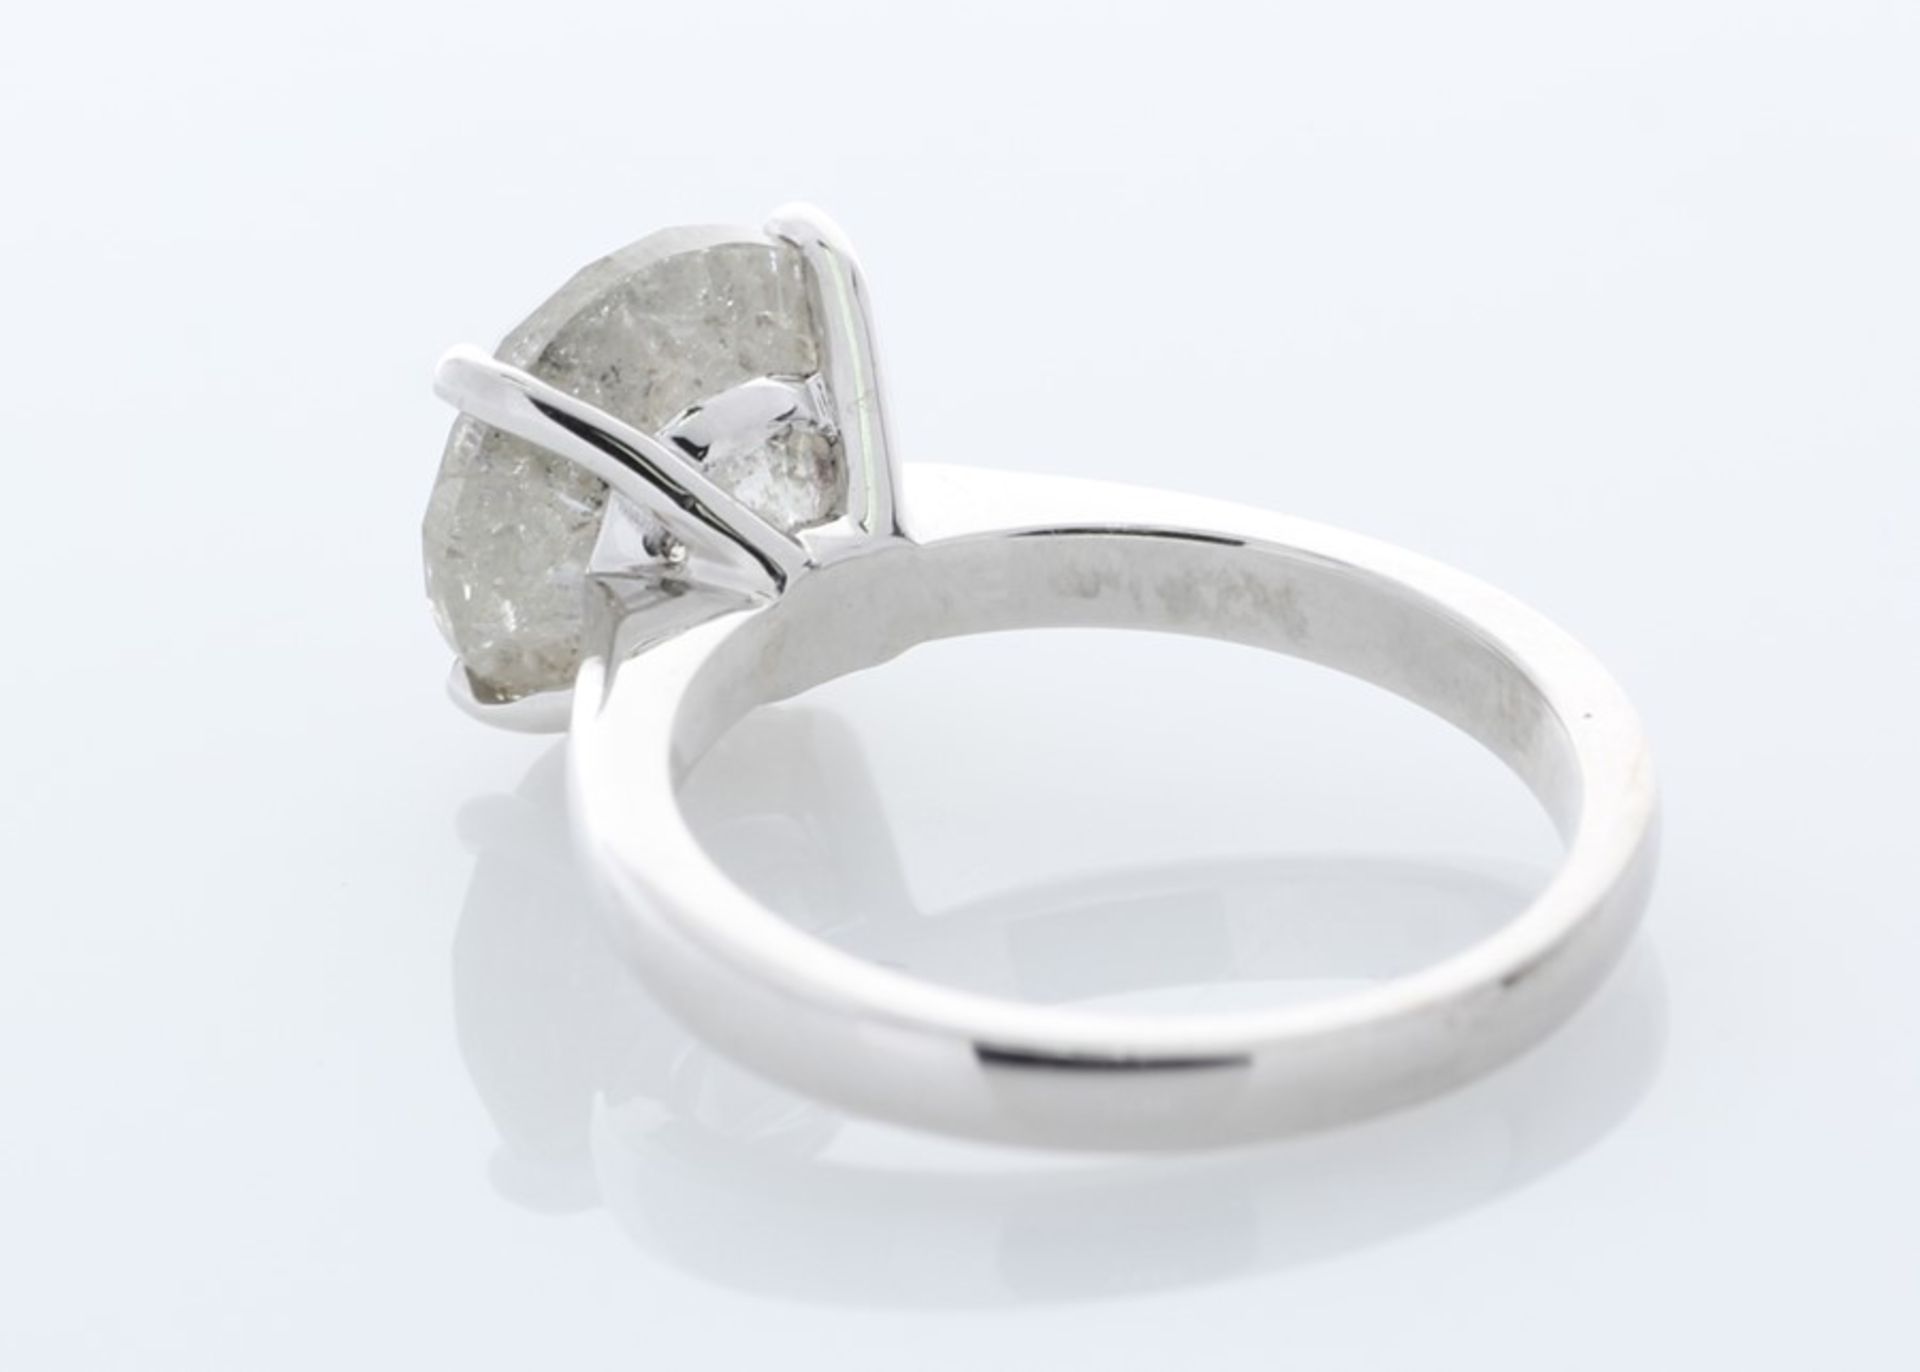 Valued by GIE £56,150.00 - 18ct White Gold Single Stone Prong Set Diamond Ring 5.00 Carats - - Image 4 of 8